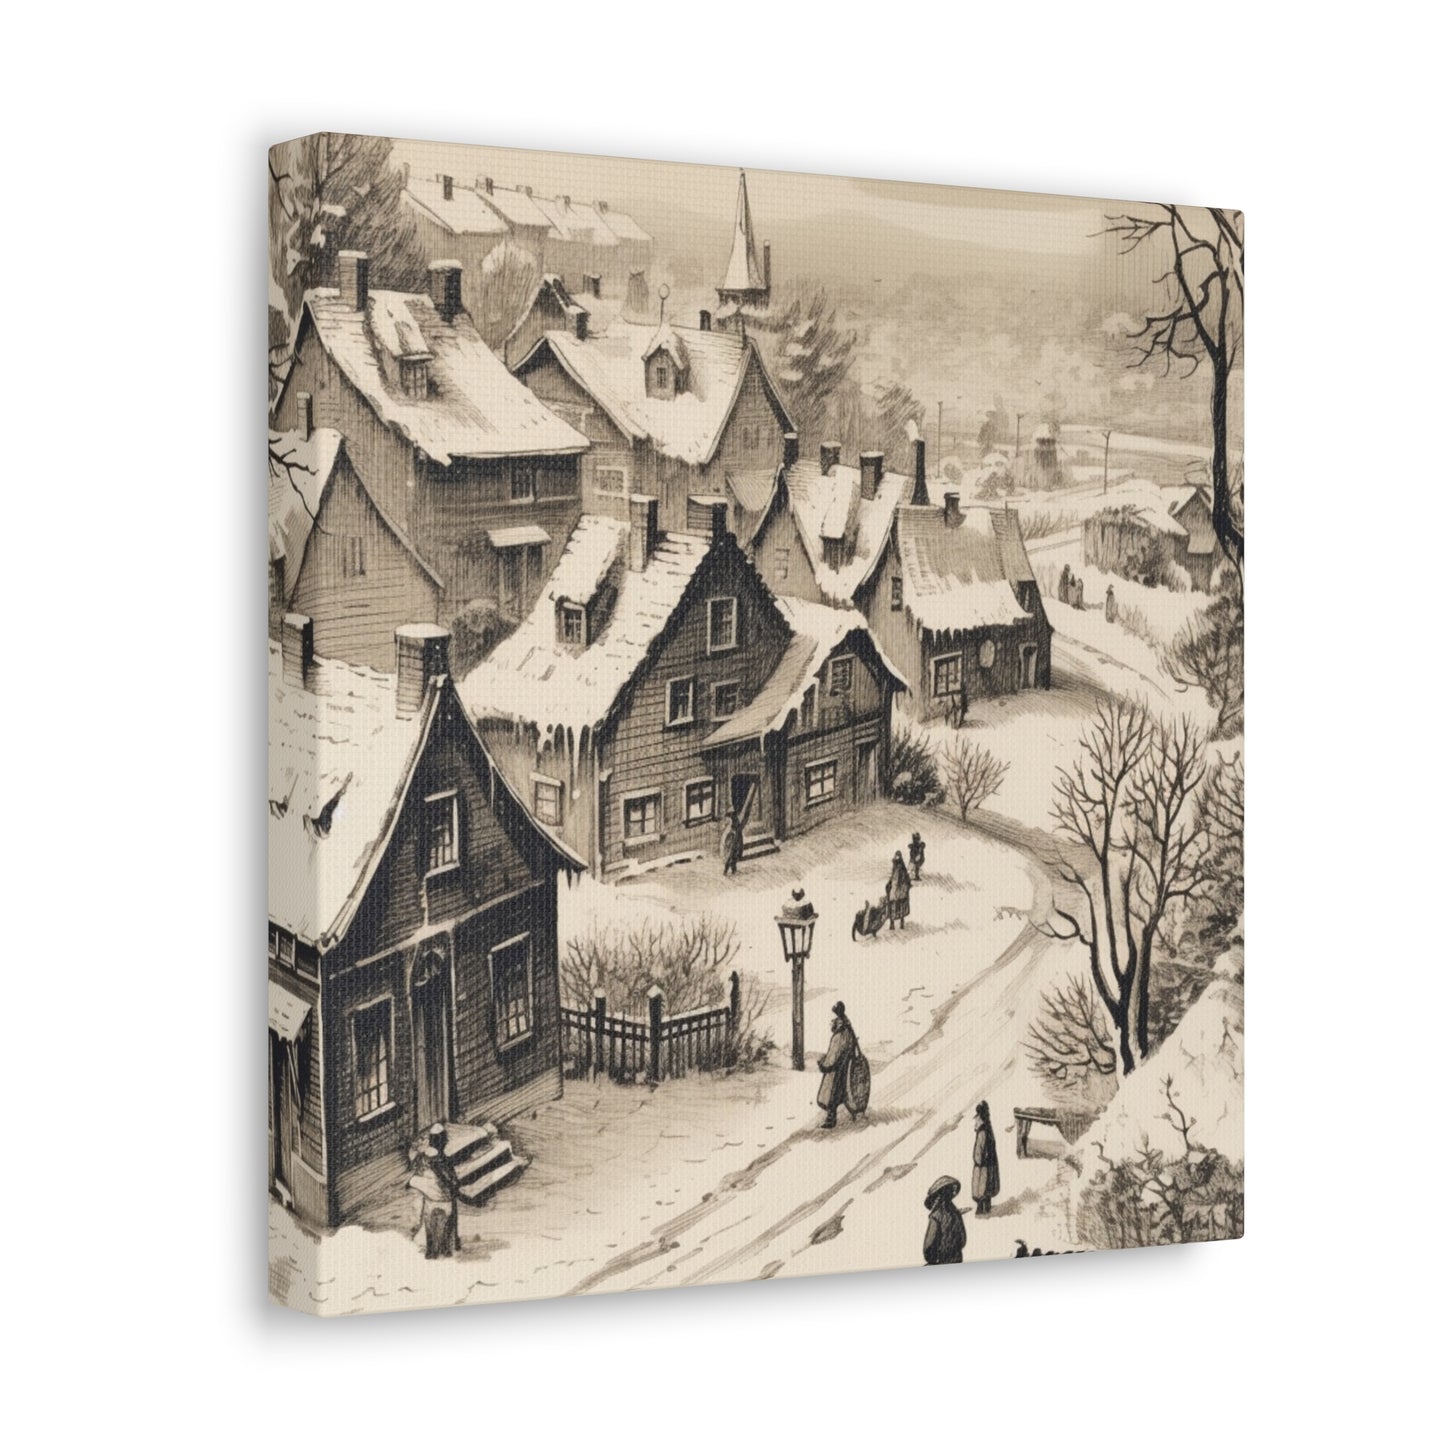 Classic winter scene canvas art for holiday decorating